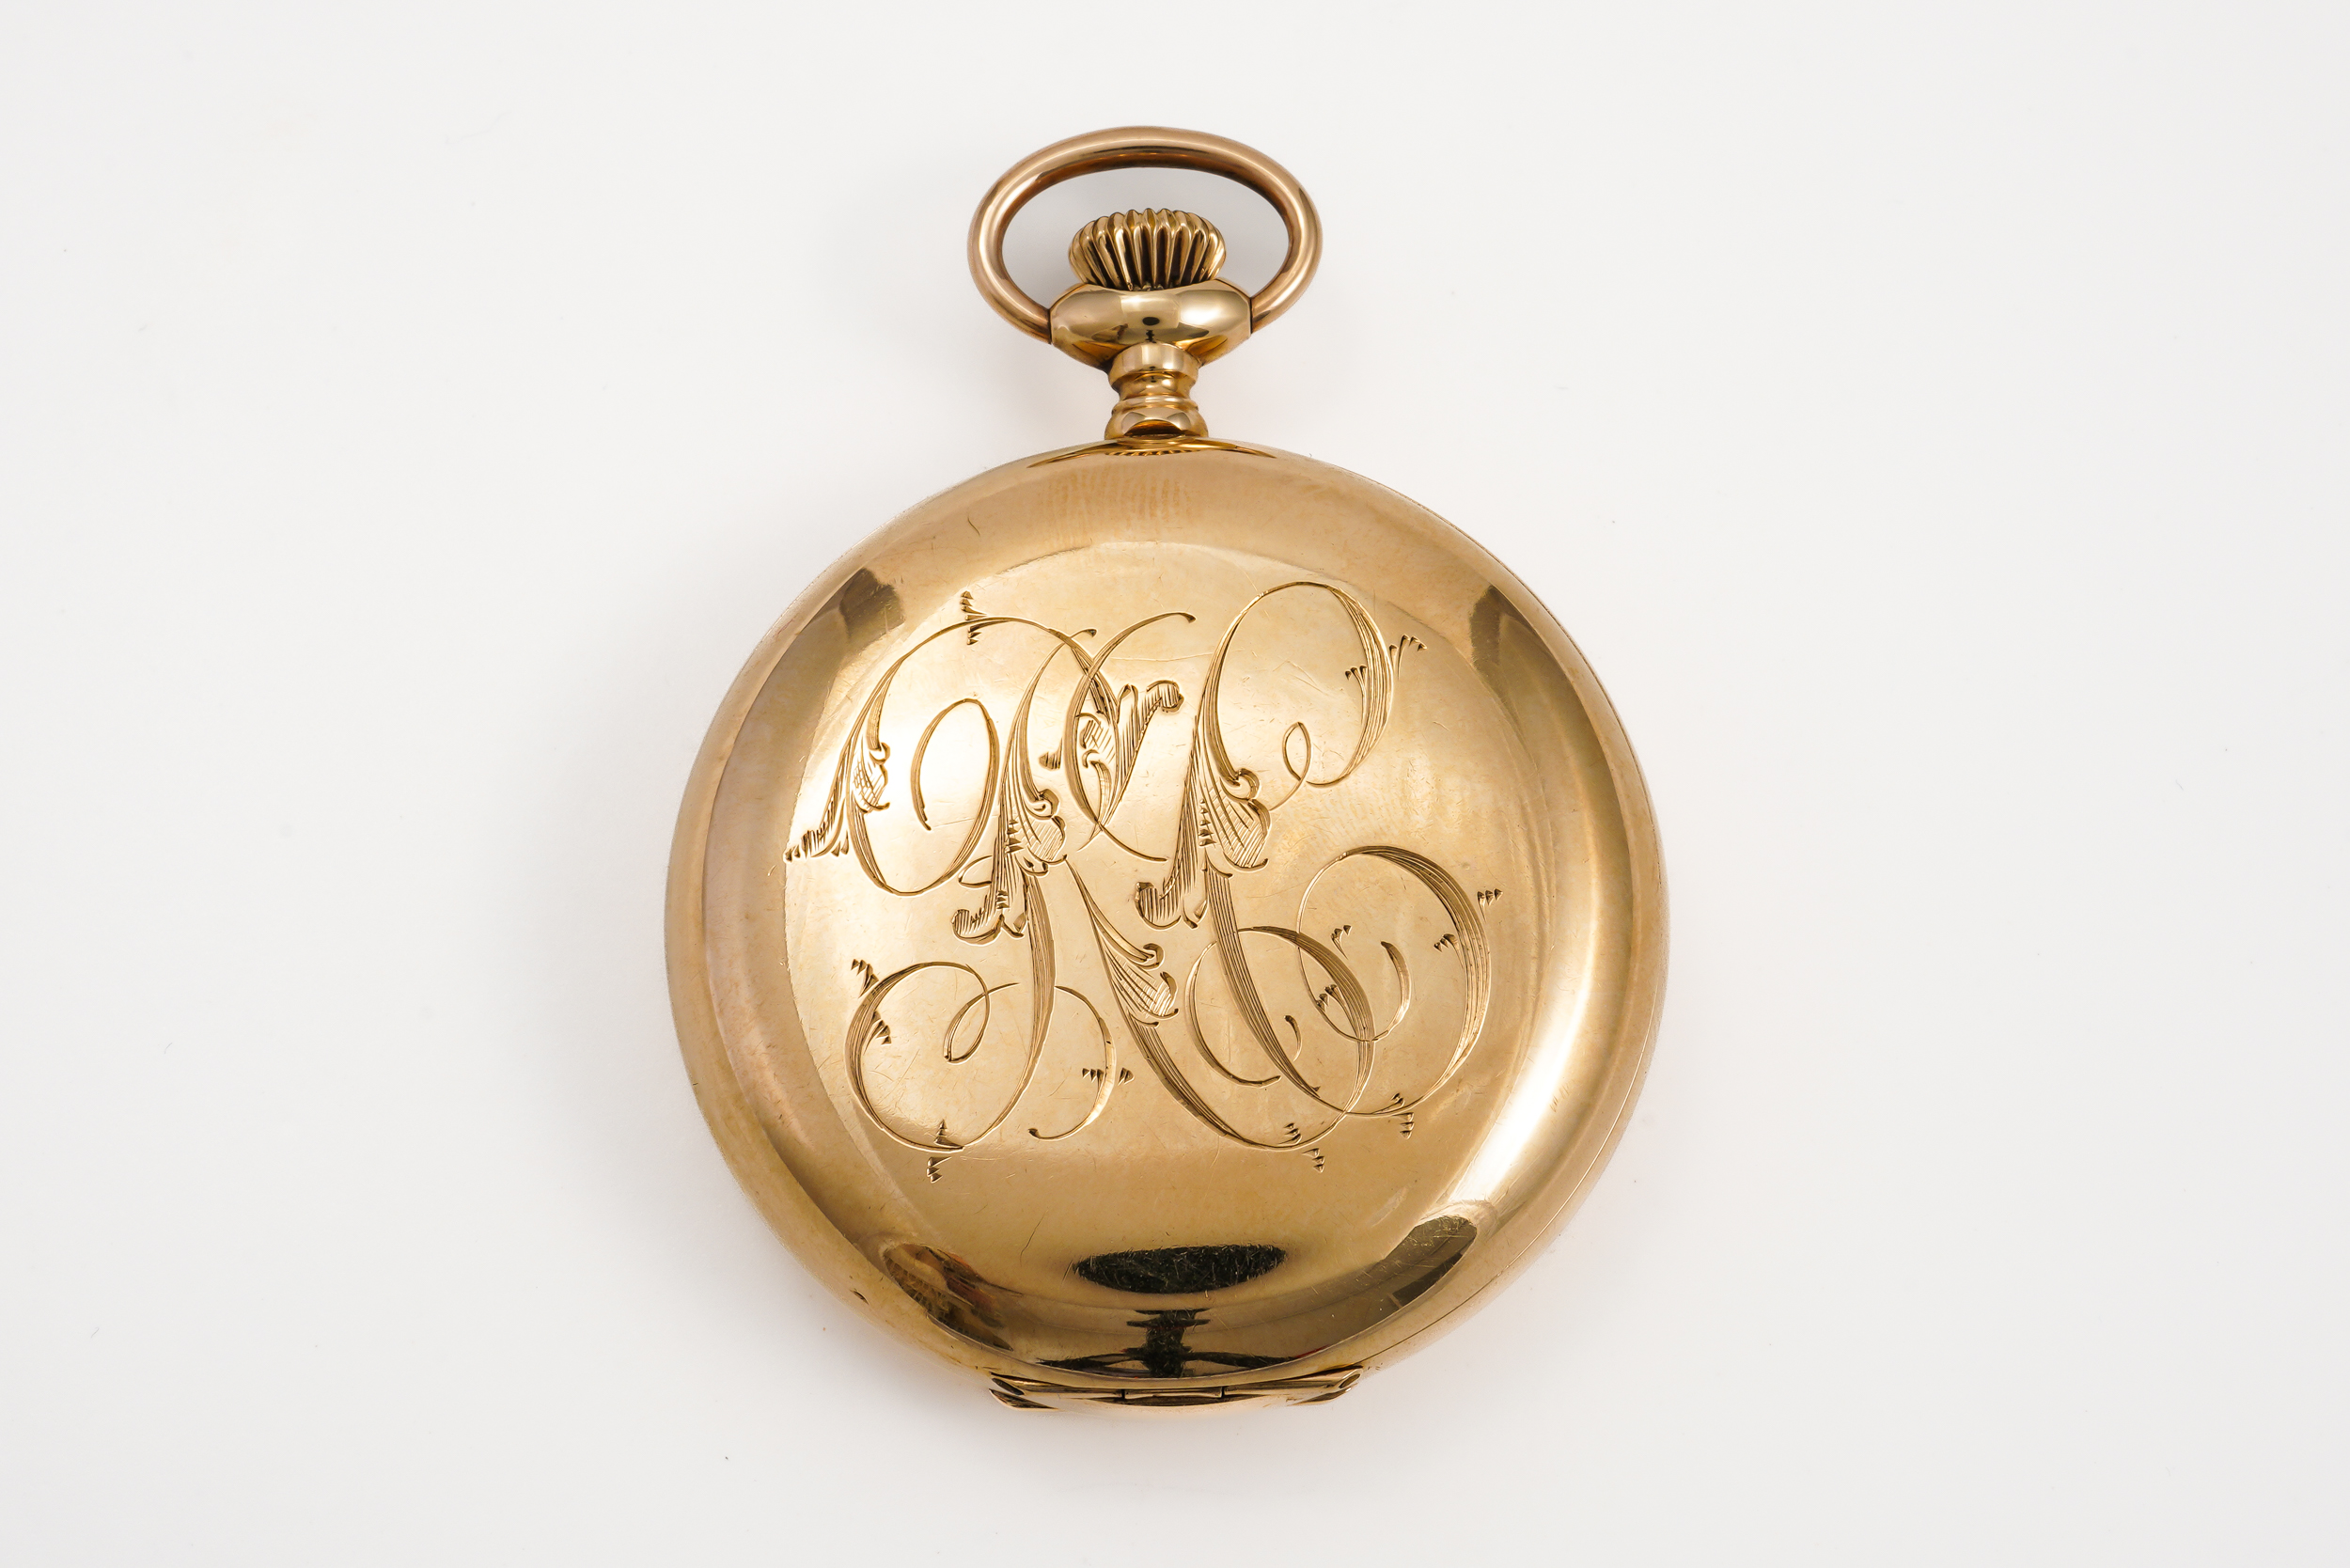 AN ELGIN GOLD CASED KEYLESS WIND HUNTING CASED POCKET WATCH - Image 2 of 5